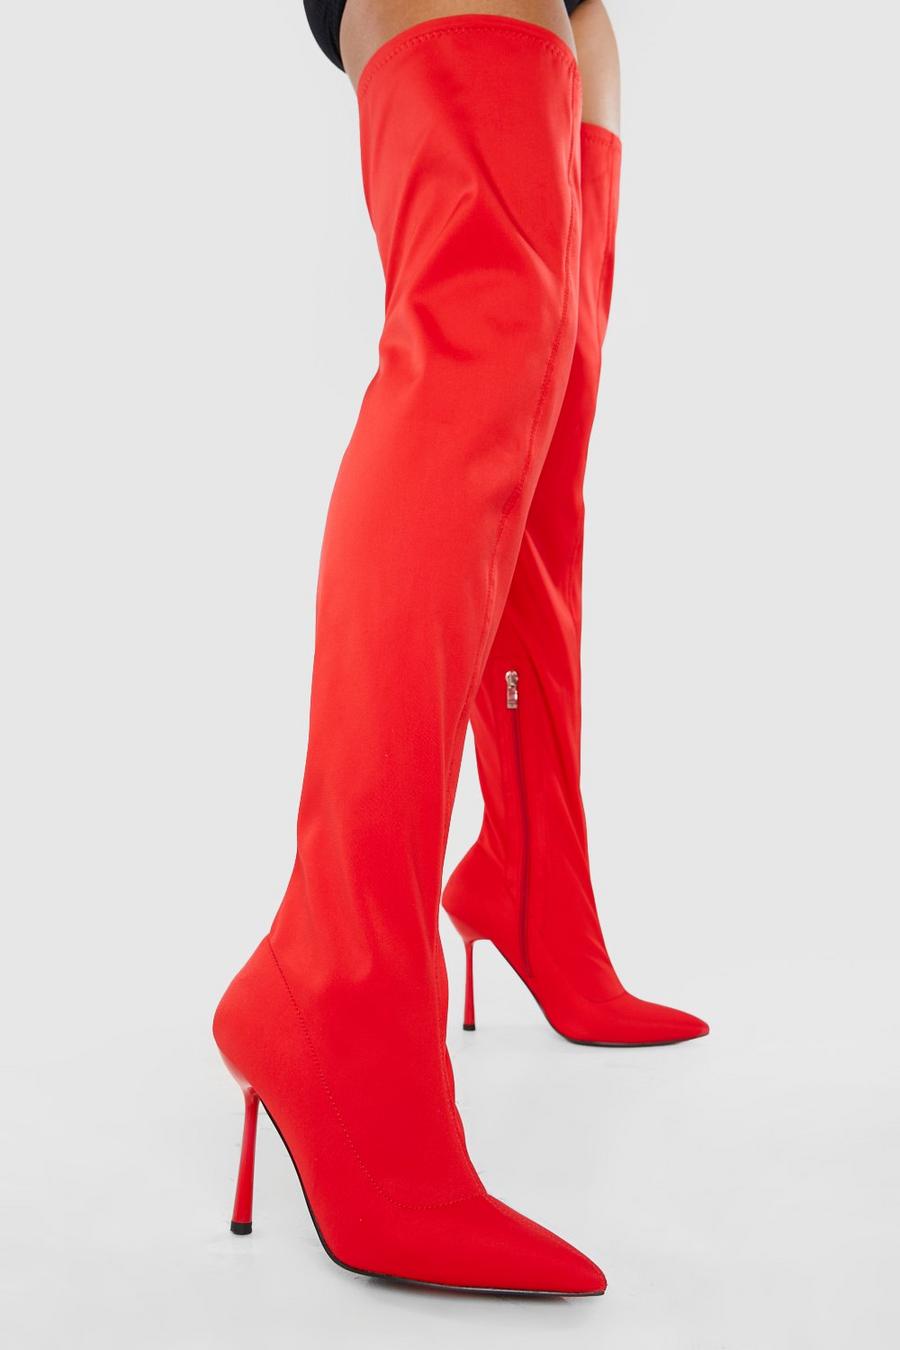 Red rouge Stretch Neoprene Thigh High Stiletto Boots